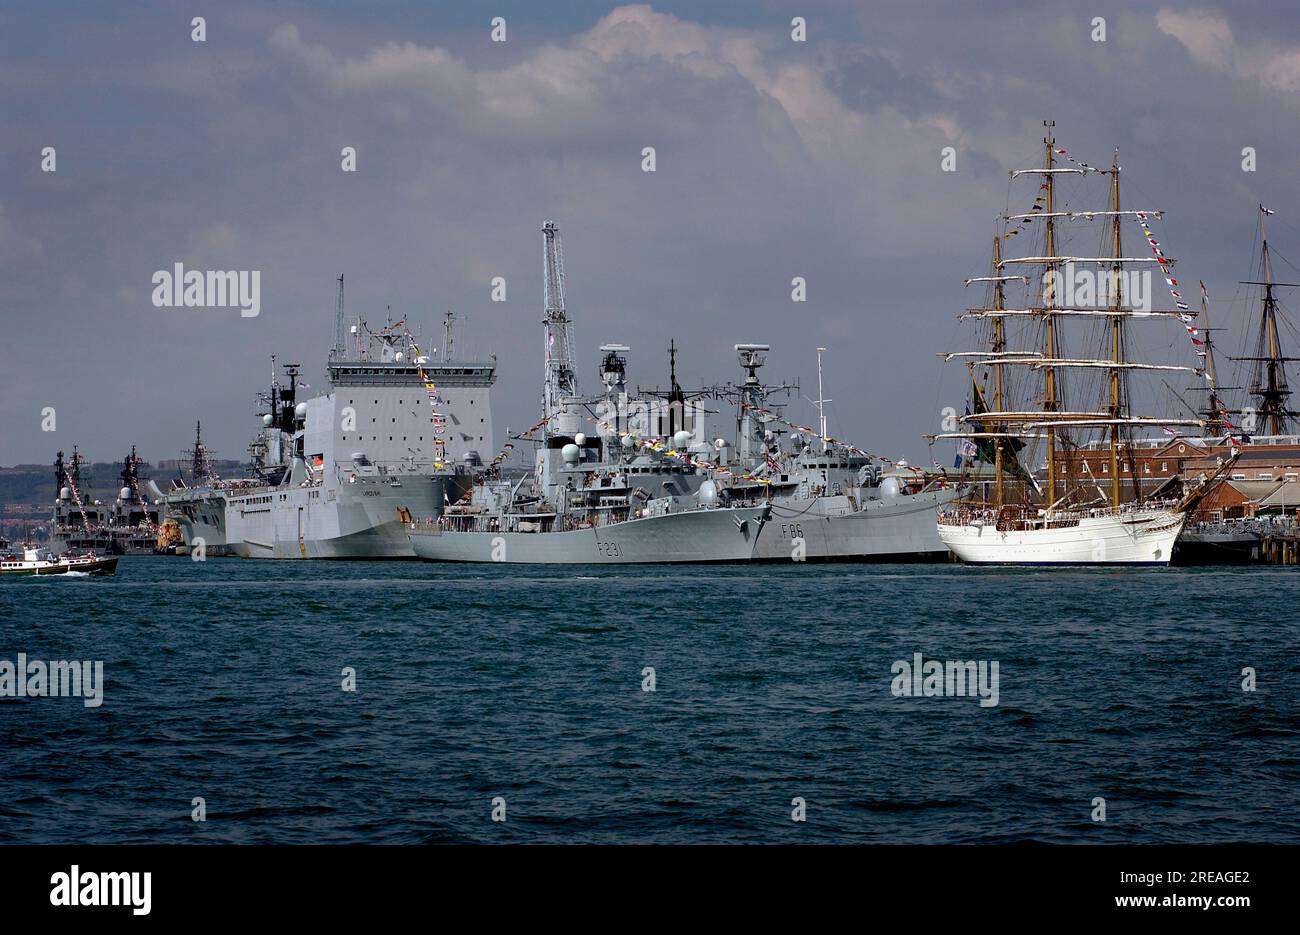 AJAXNETPHOTO. 26TH JULY 2008. PORTSMOUTH, ENGLAND. - MEET YOUR NAVY - SHIPS ON VIEW AT THE NAVAL BASE - (L-R) JAPANESE DEFENCE TRIO, HMS ILLUSTRIOUS, RFA LARGS BAY, HMS ARGYLL (F231,OUTSIDE), HMS CAMPBLETOWN (F86), BRAZILIAN SAIL TRAINER CISNE BRANCO, MASTS OF HMS VICTORY. PHOTO:JONATHAN EASTLAND/AJAX REF:82907 108 Stock Photo